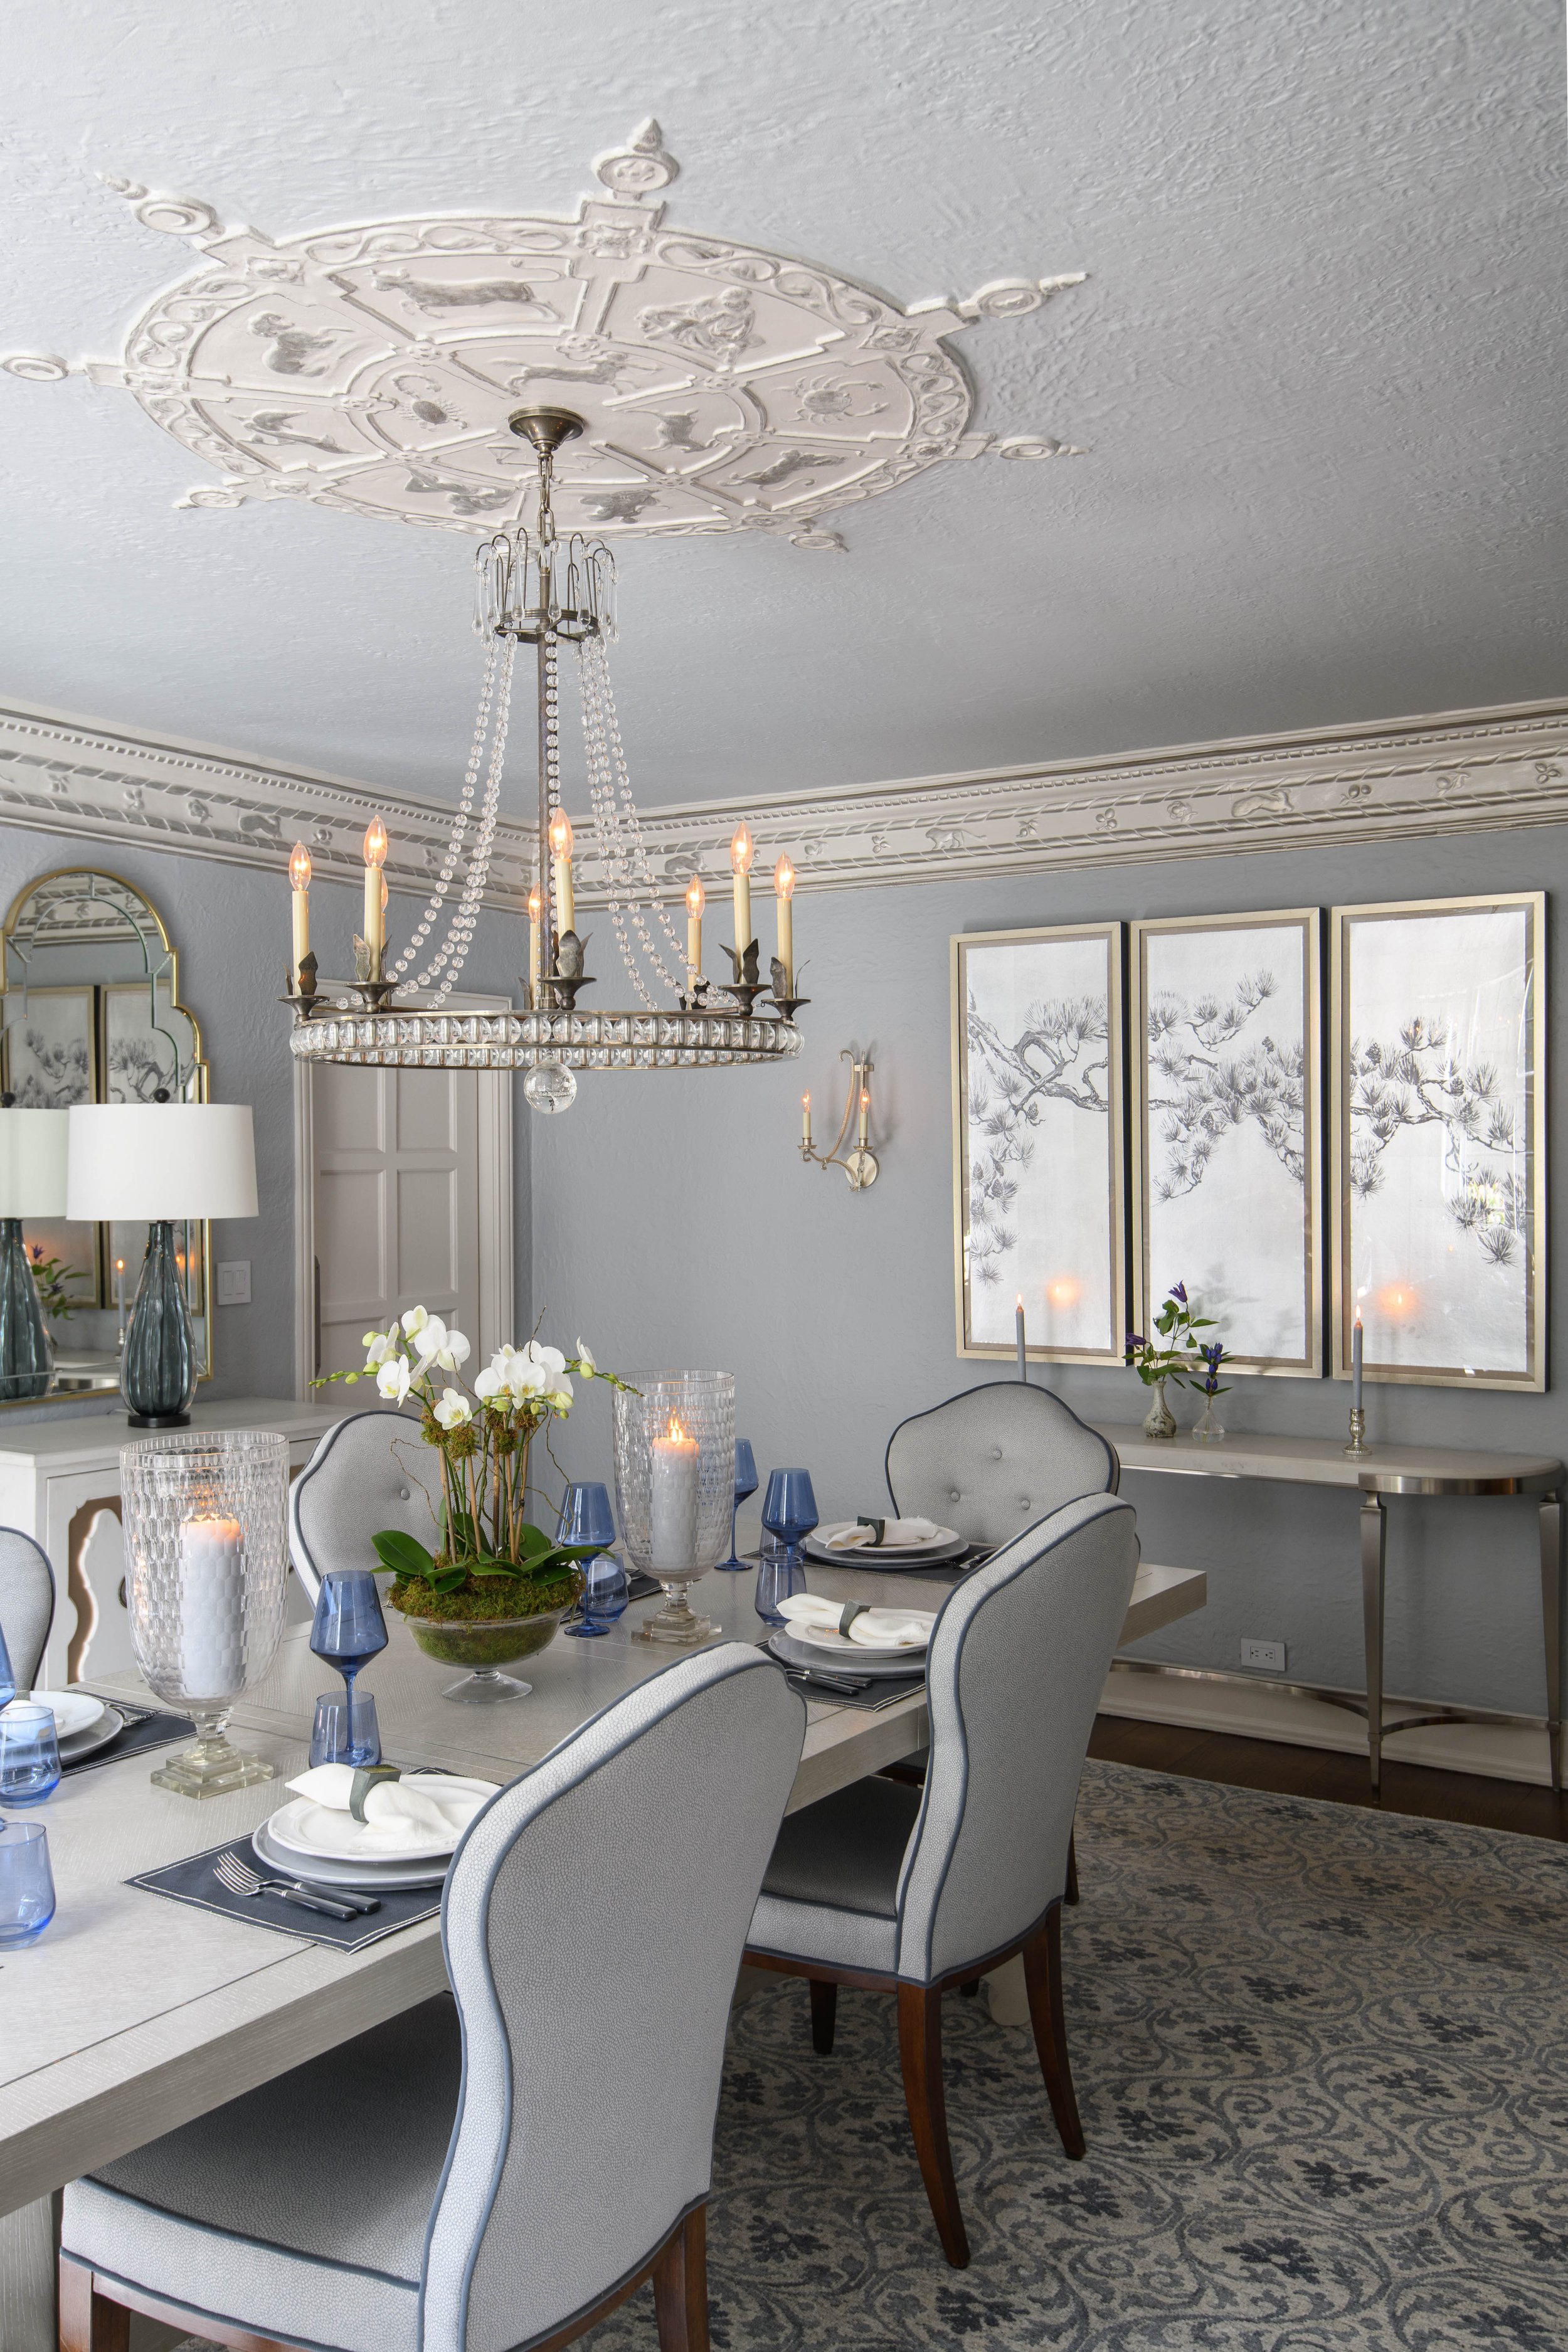 9-blue-accents-dining-area-white-candle-chandelier-chic-space-textured-rug-westechester-rinfret-interior-designs.jpg